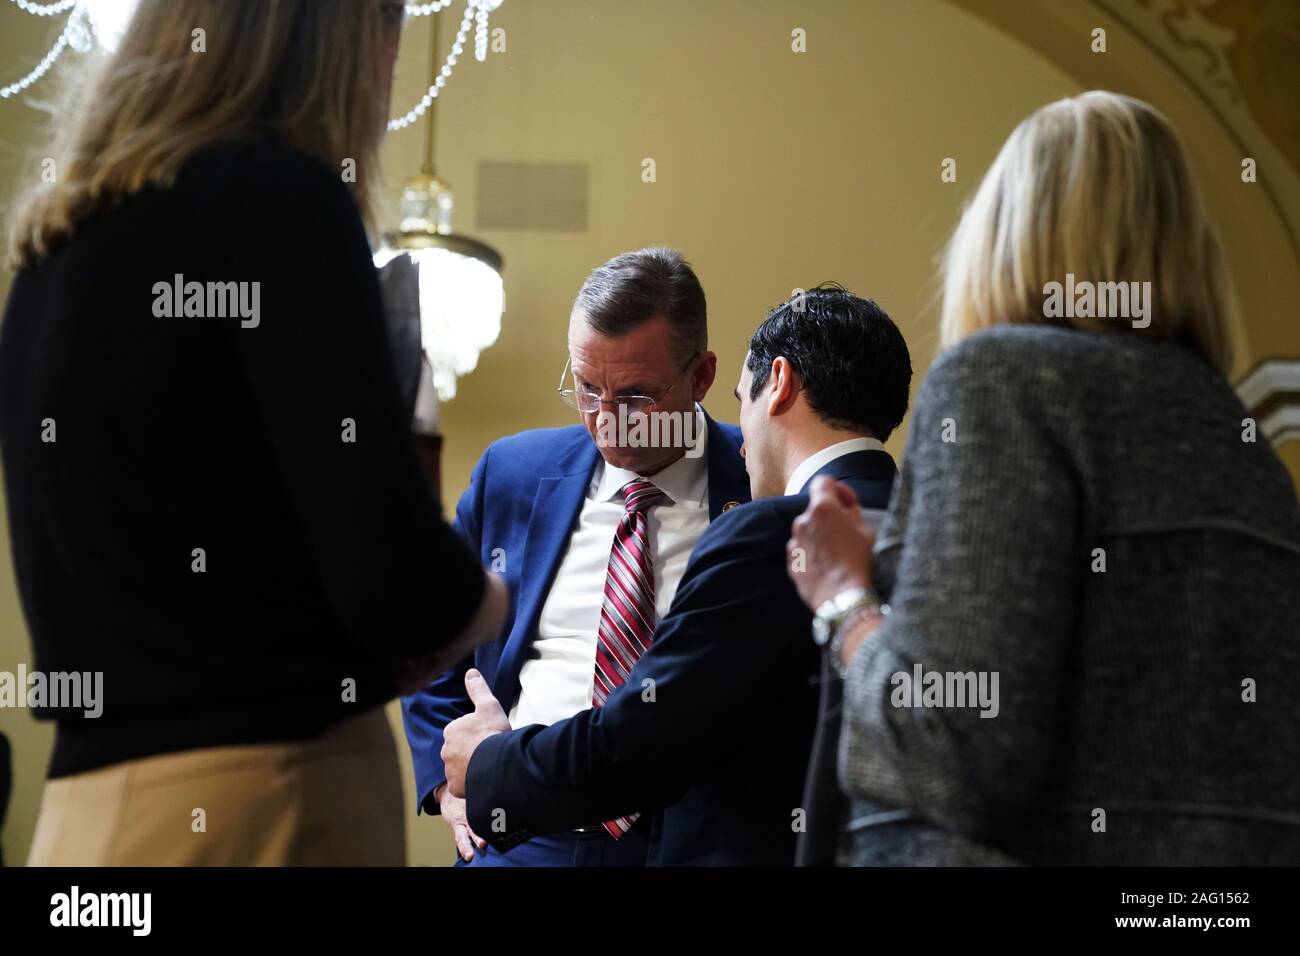 United States Representative Doug Collins (Republican of Georgia), Ranking Member, US House Judiciary Committee before a meeting of the house committee on rules to consider H. Res. 755 'Impeaching Donald John Trump, President of the United States, for high crimes and misdemeanors' on Capitol Hill in Washington, DC on December 17, 2019. Credit: Erin Schaff/Pool via CNP /MediaPunch Stock Photo